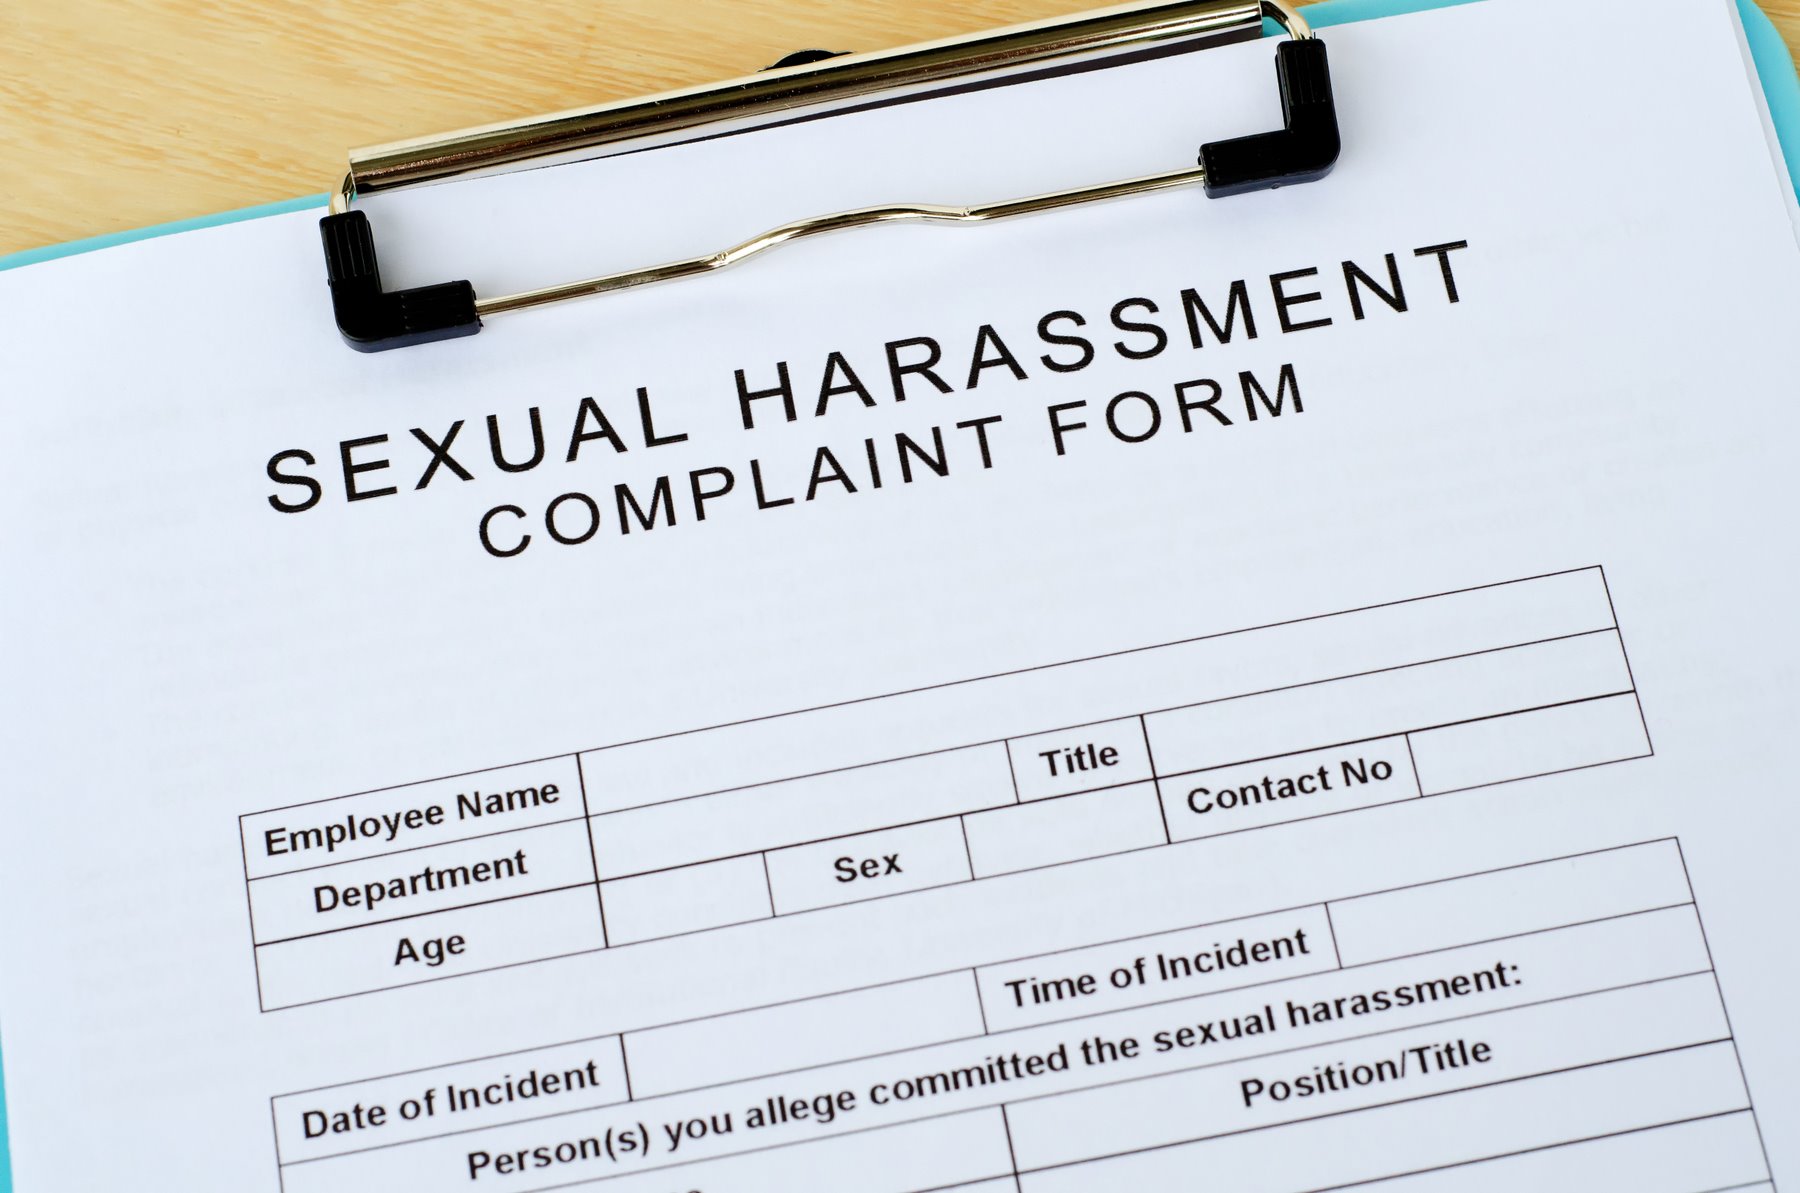 Blank Sexual Harassment Complain Form